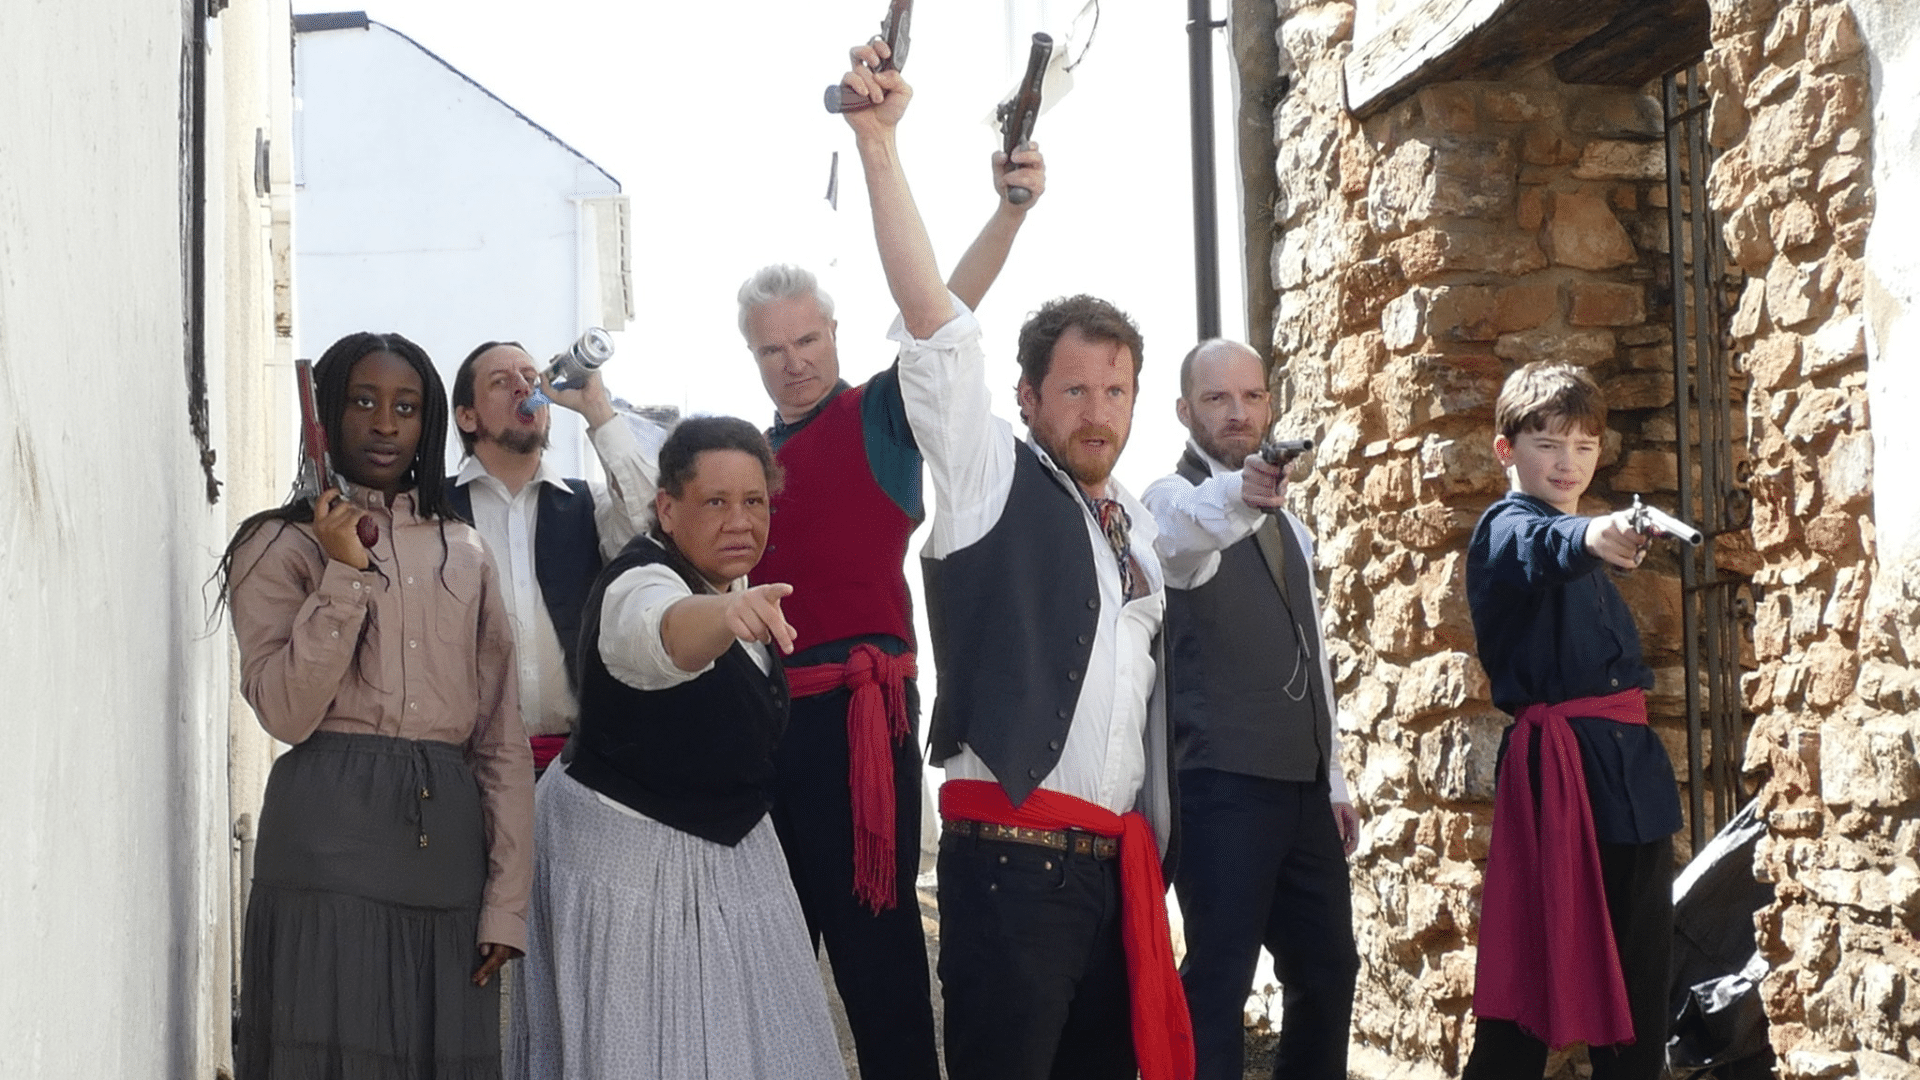 Group photo of the South Devon Players actors playing the revolutionaries